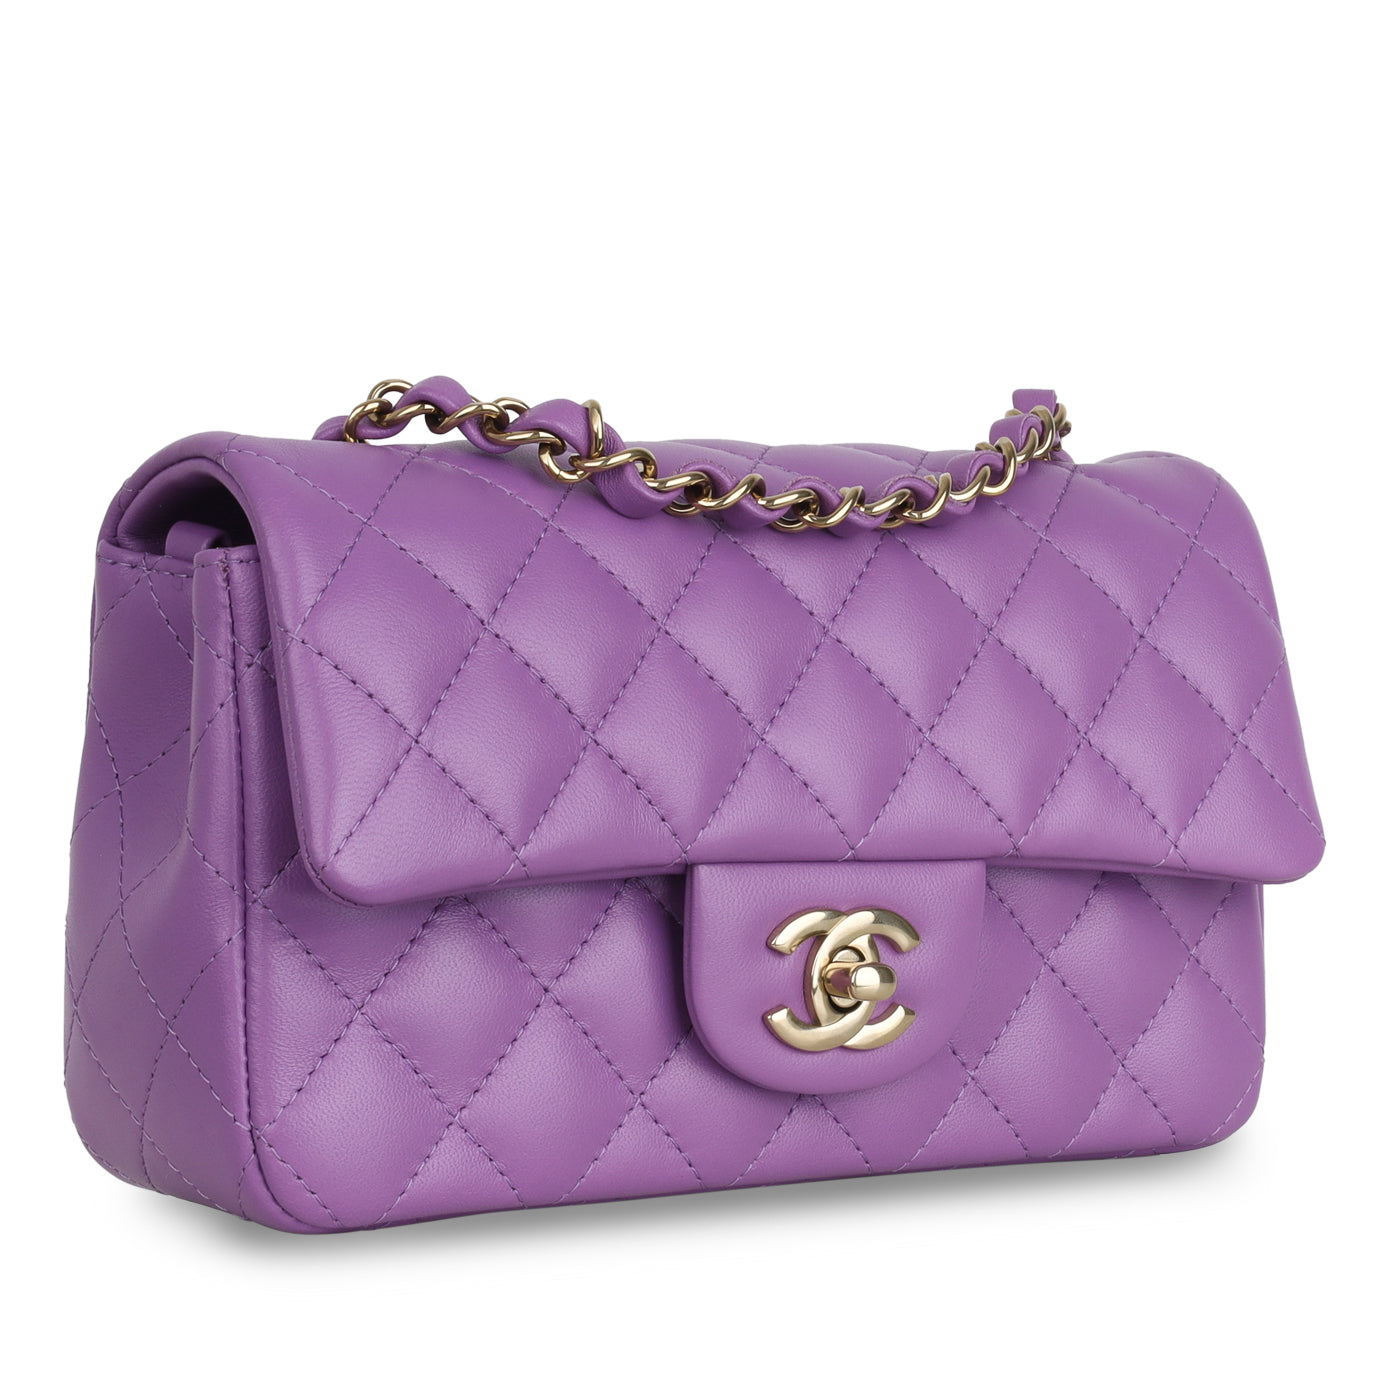 My Most Wanted Chanel Bag Arrived - Chanel Denim Mini Pearl Crush